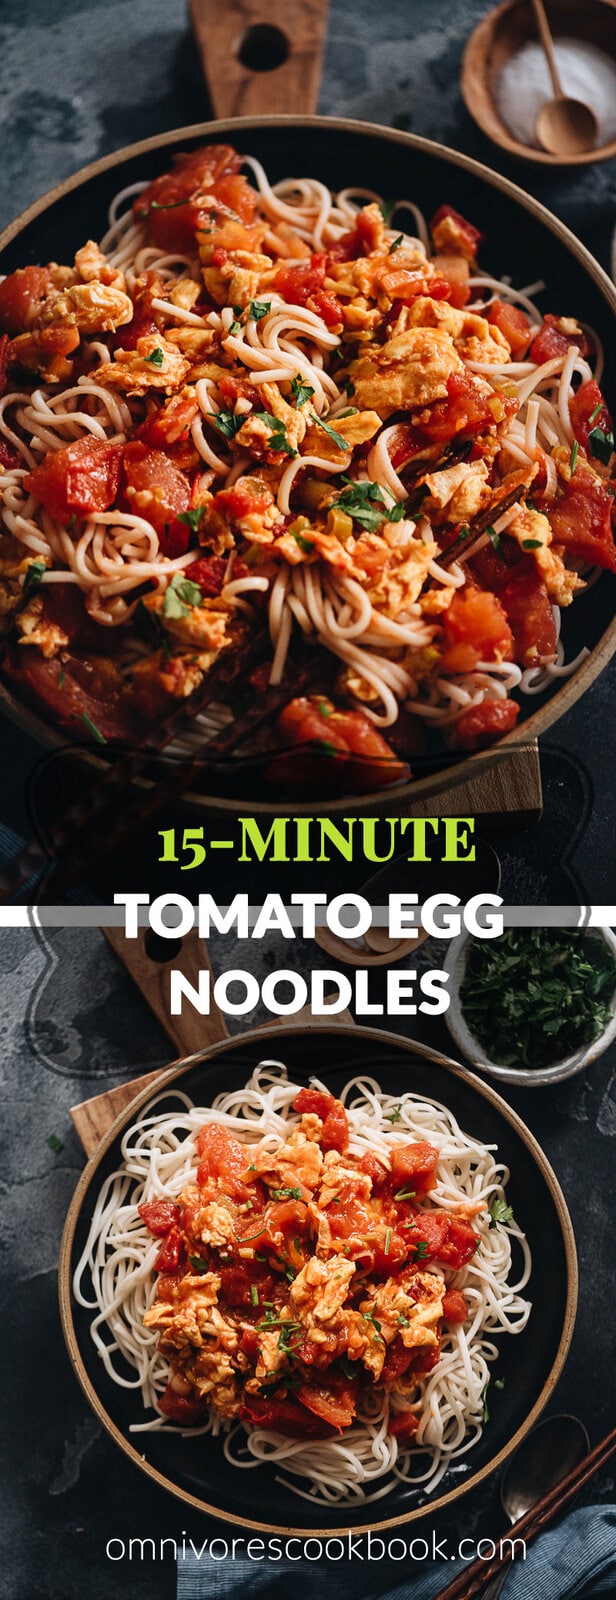 15-Minute Tomato Egg Noodles | Make this dish when you’re in a rush because it takes no time to whip it up for a comforting meal. The scrambled eggs are cooked with tomatoes, aromatics, and a drizzle of soy sauce to create a simple scrumptious sauce, served on top of boiled noodles. So simple and hearty. {Gluten-Free adaptable}